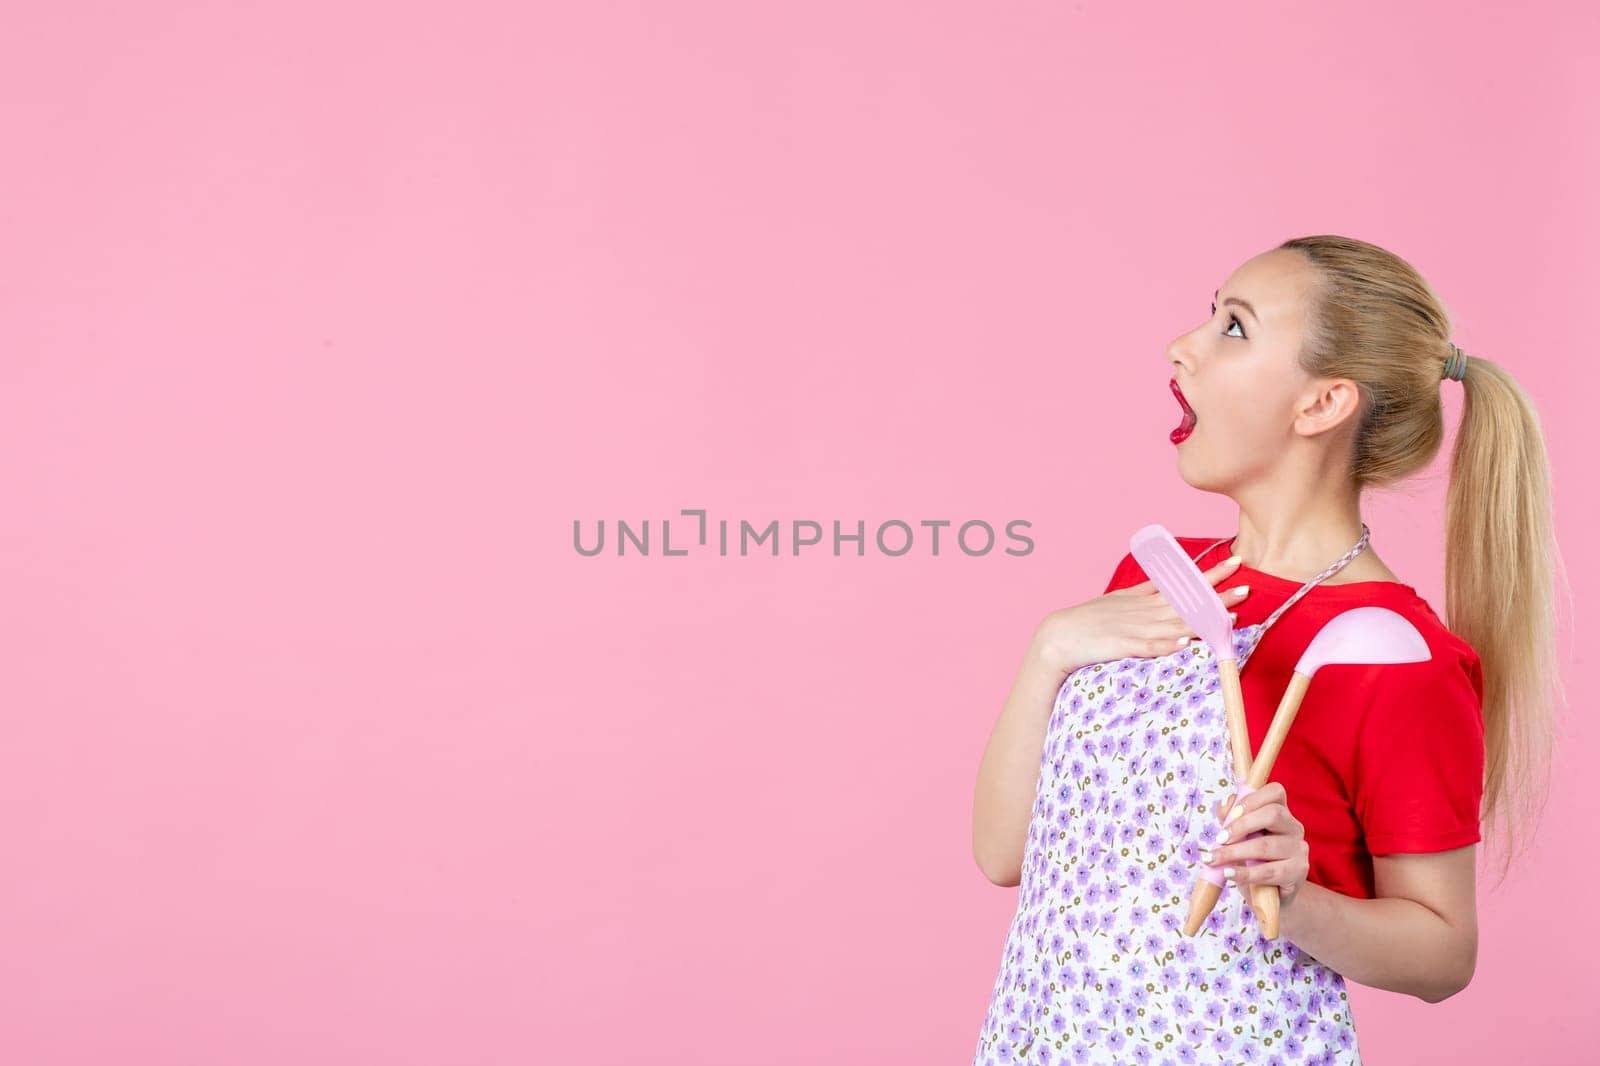 front view young housewife in cape holding spoons on pink background horizontal profession duty job worker wife uniform cutlery occupation by Kamran